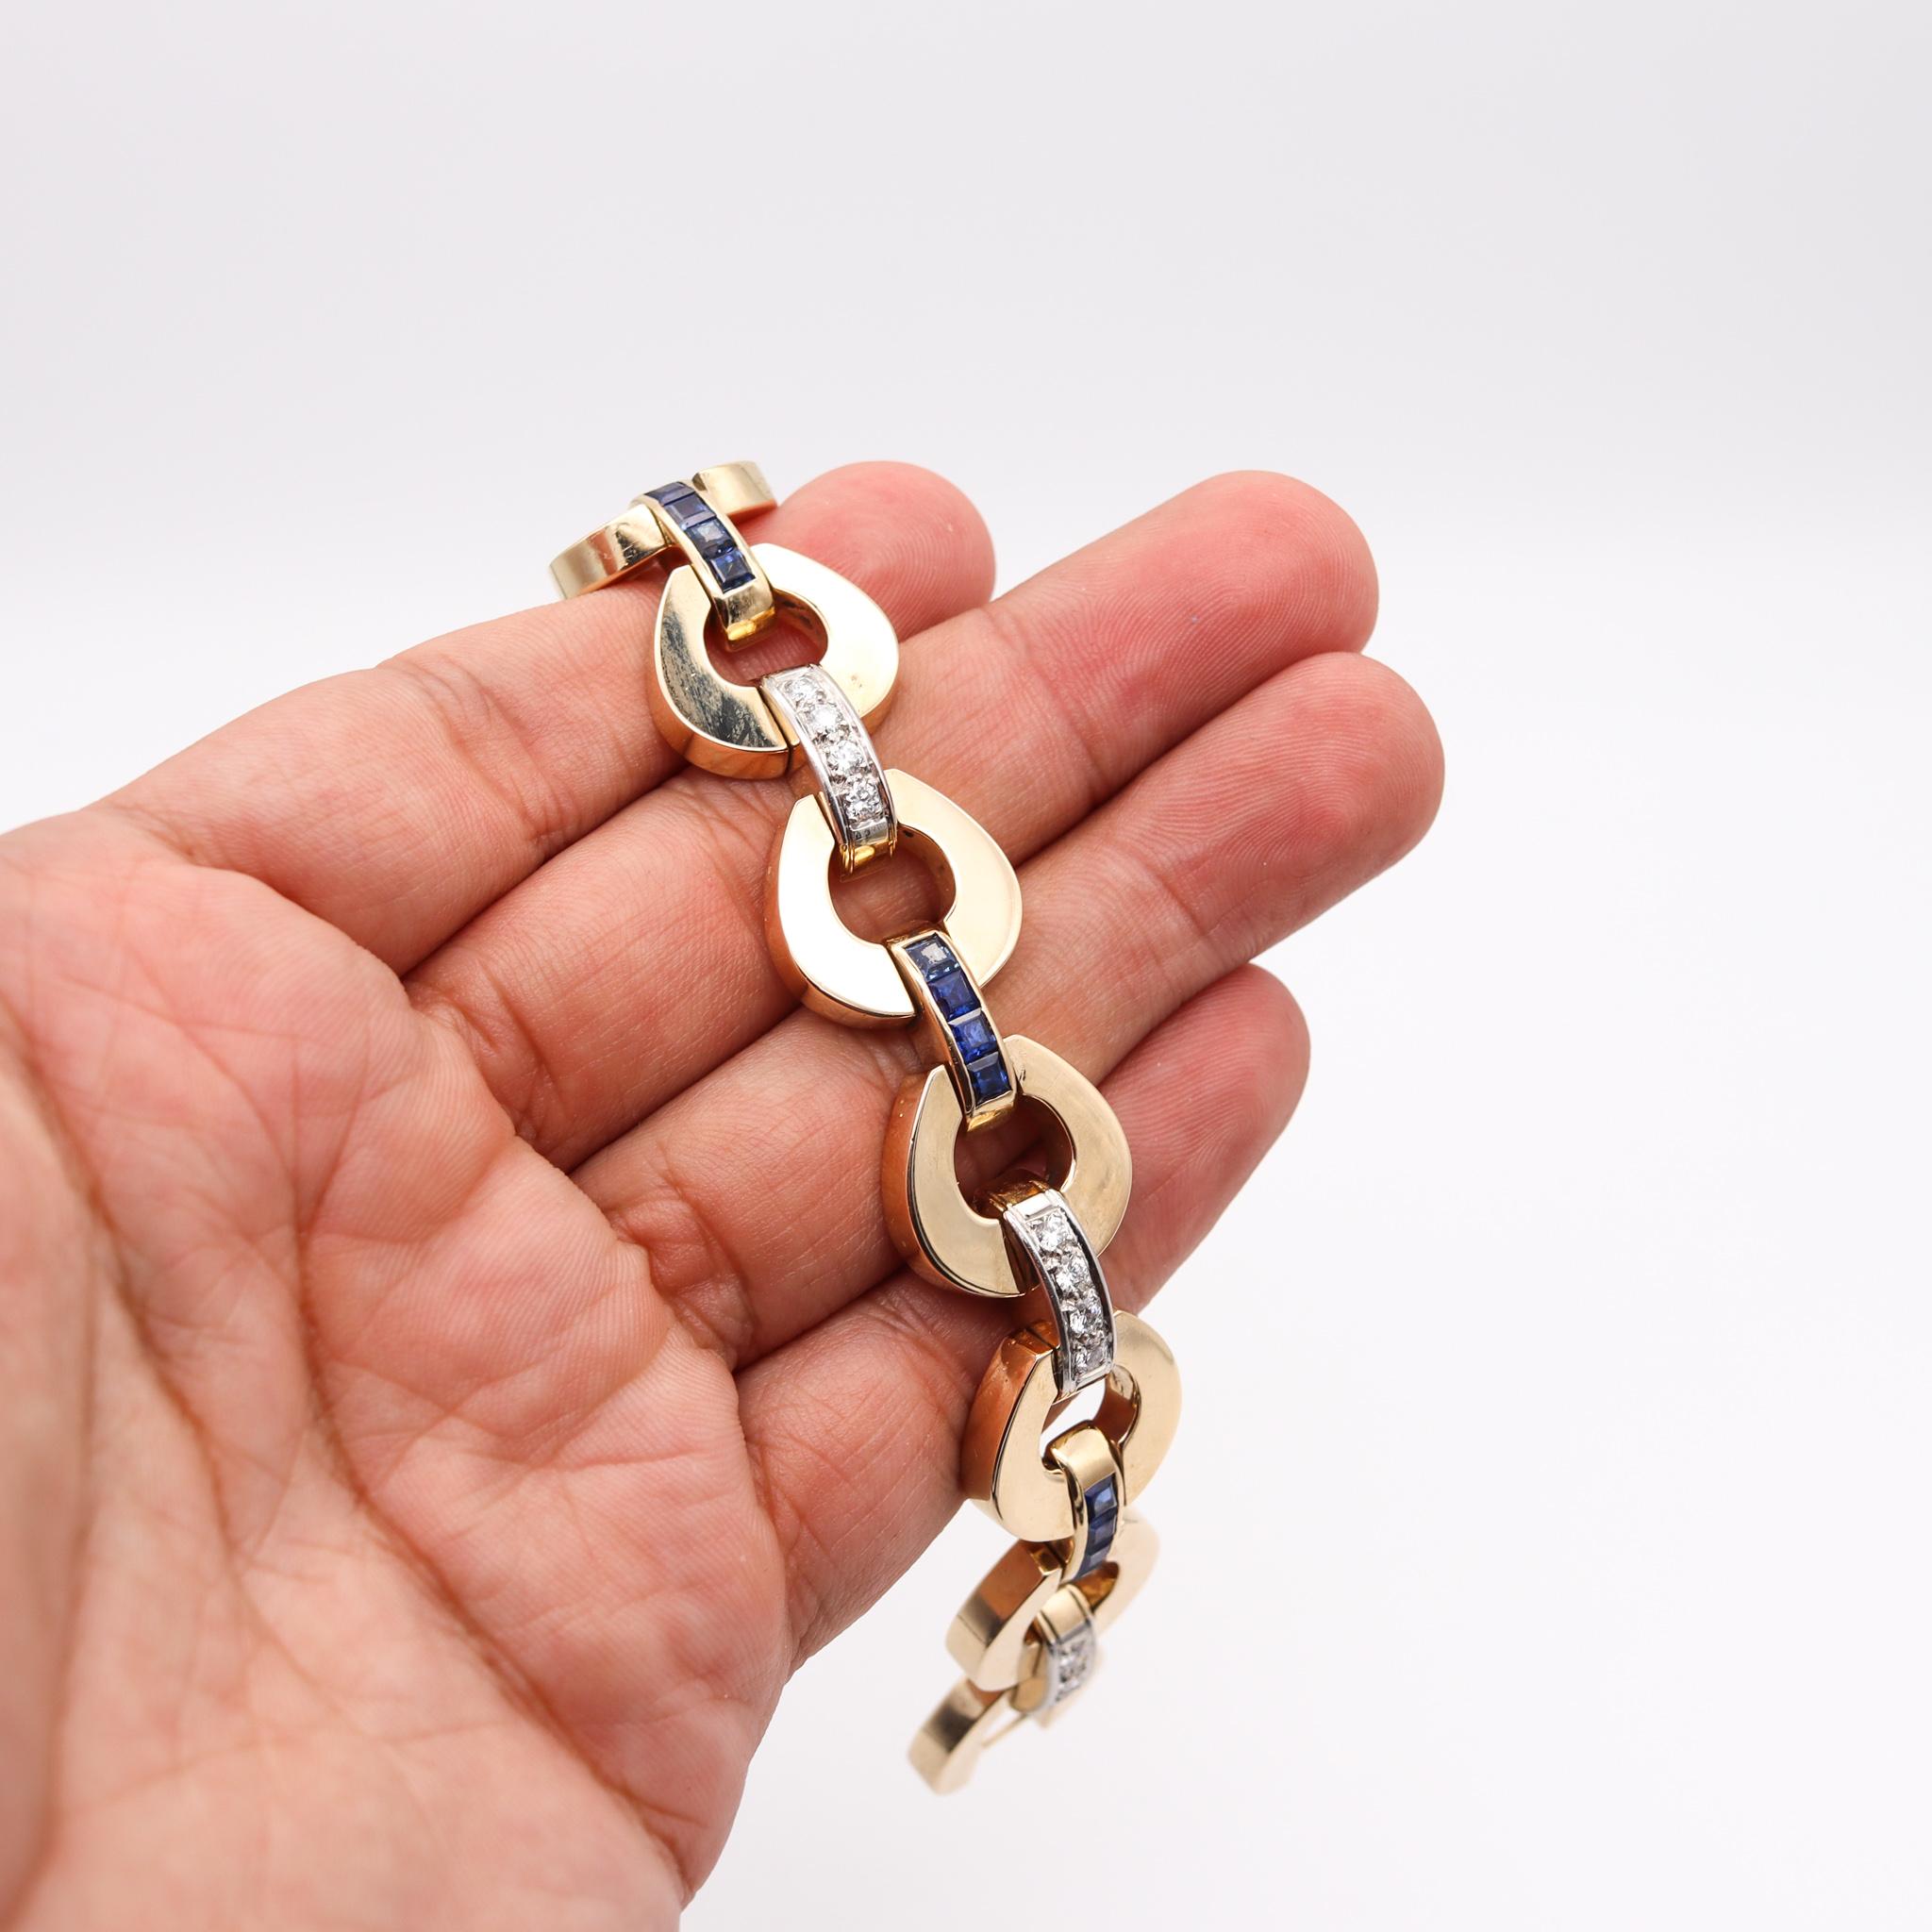 Women's Retro Modernist Bracelet in 14Kt Yellow Gold with 6.56 Ctw Diamonds & Sapphires For Sale